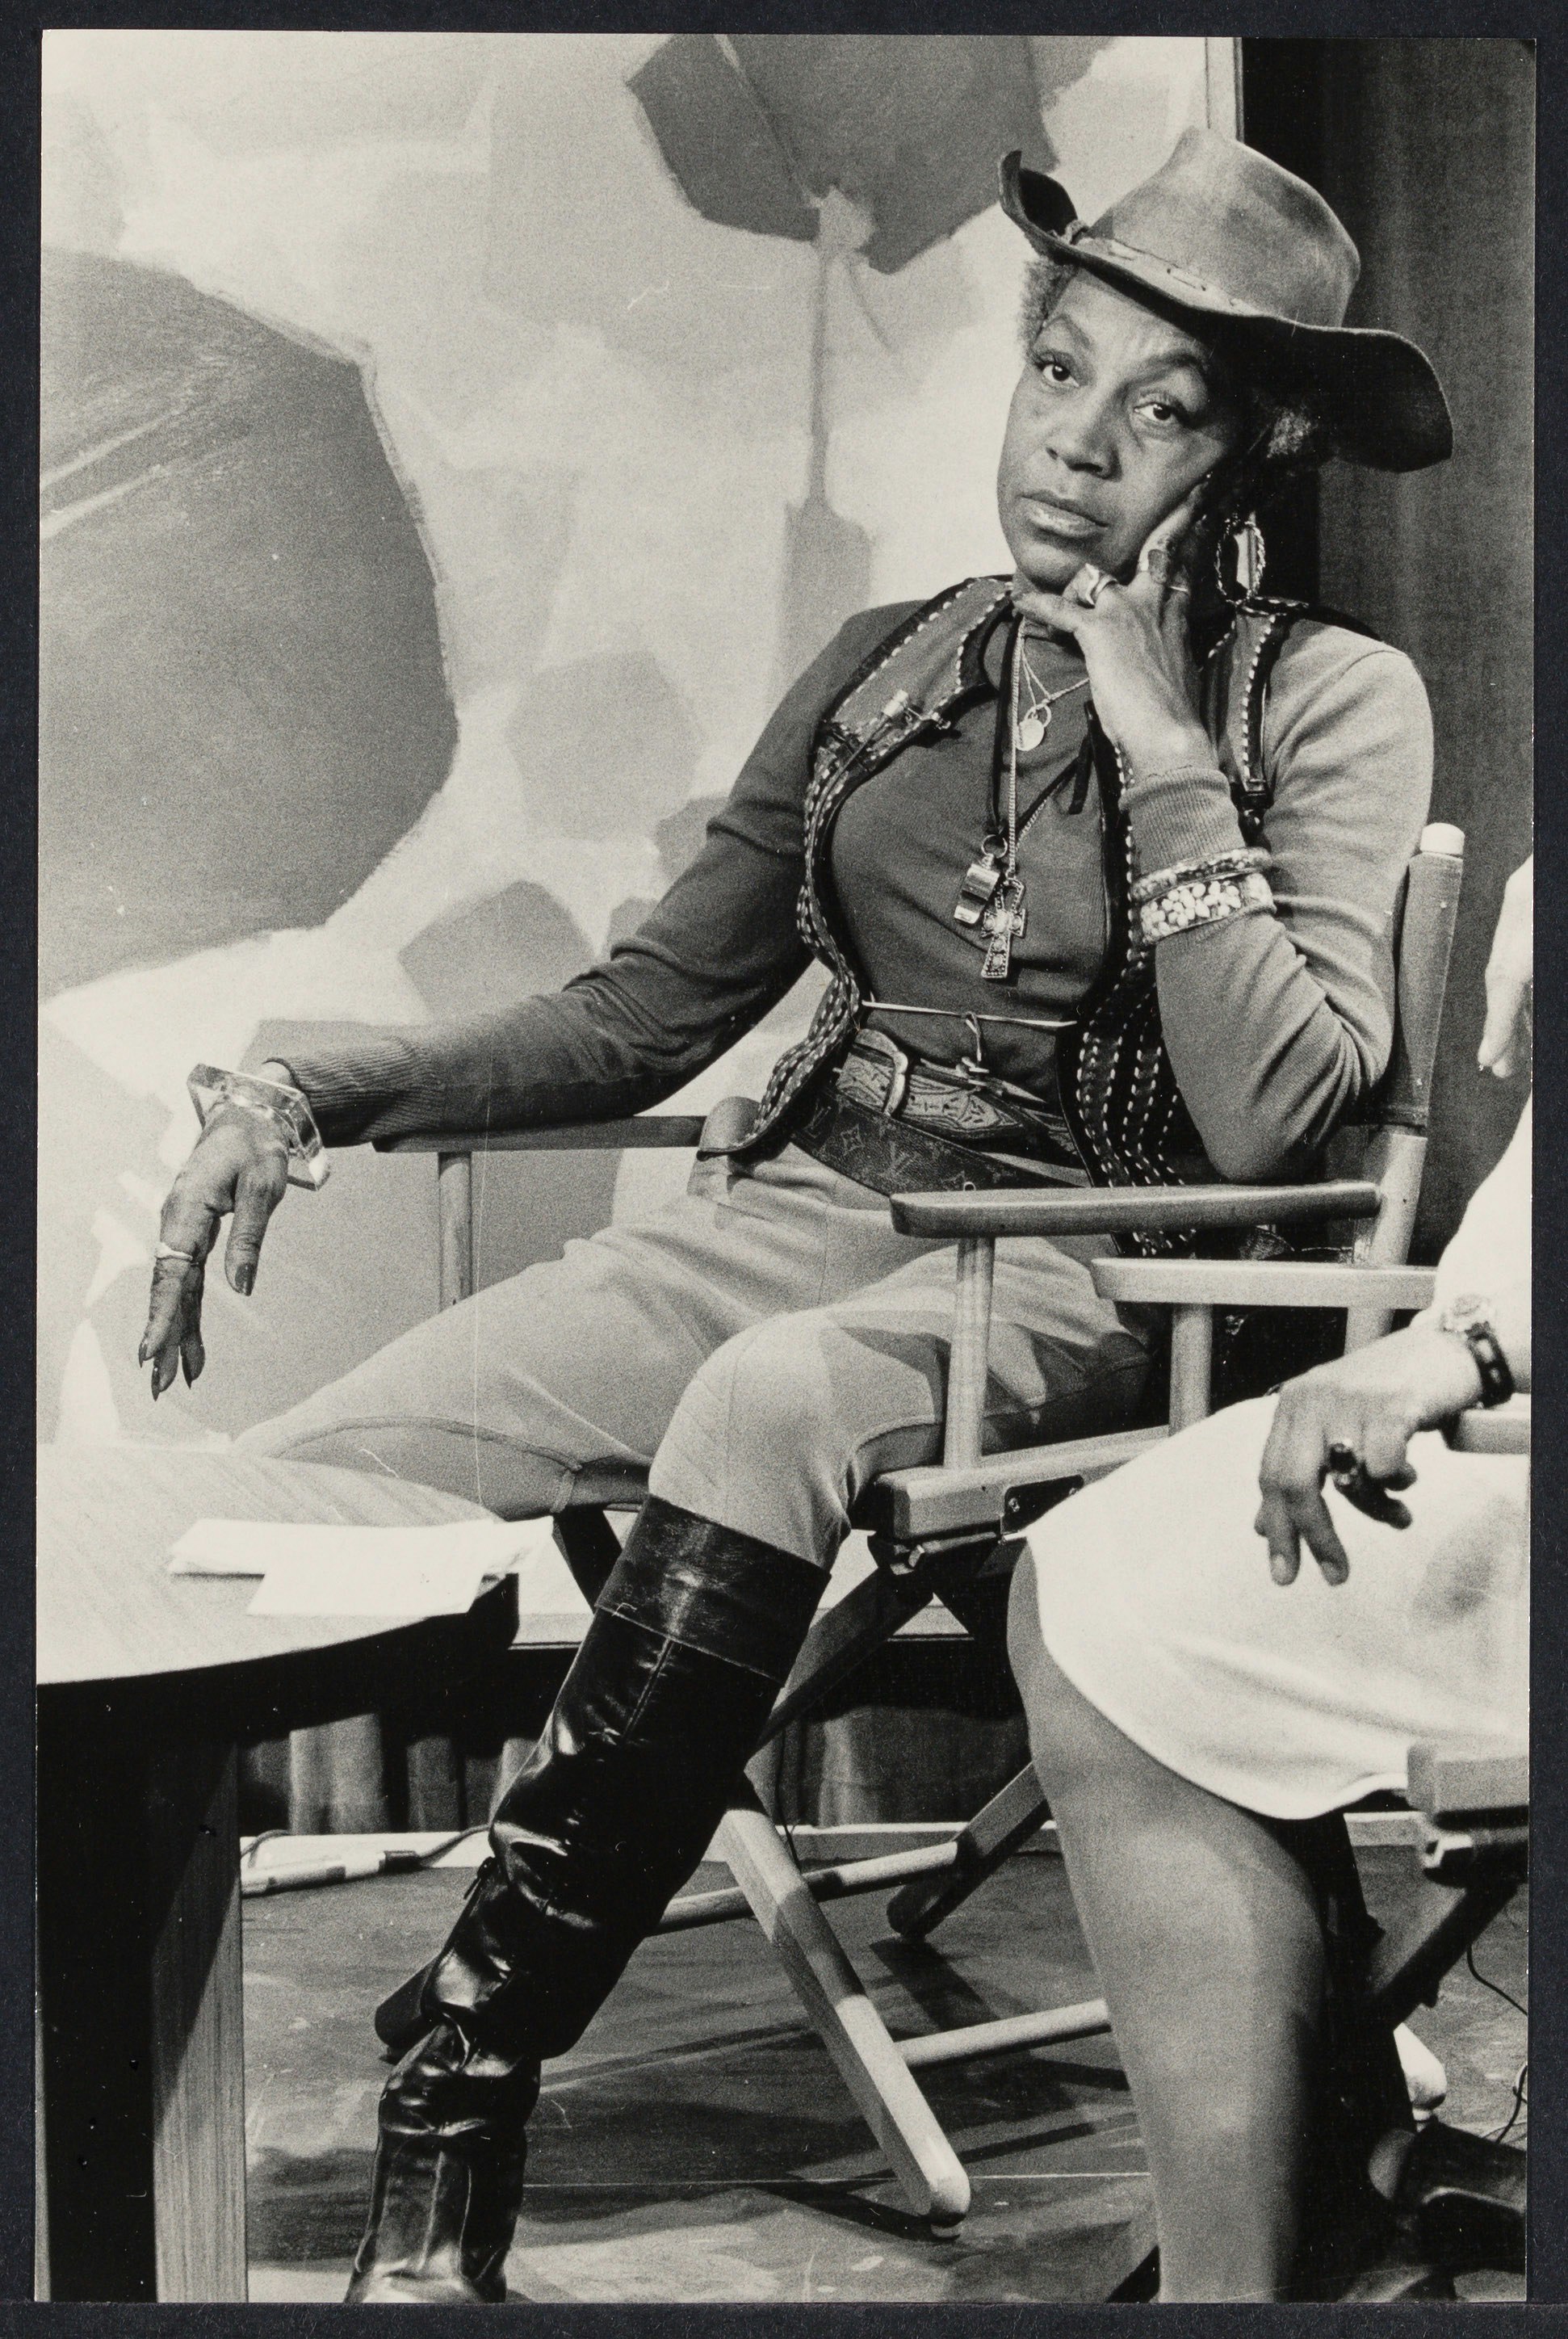 Flo Kennedy seated at "Outreach Women" TV Program